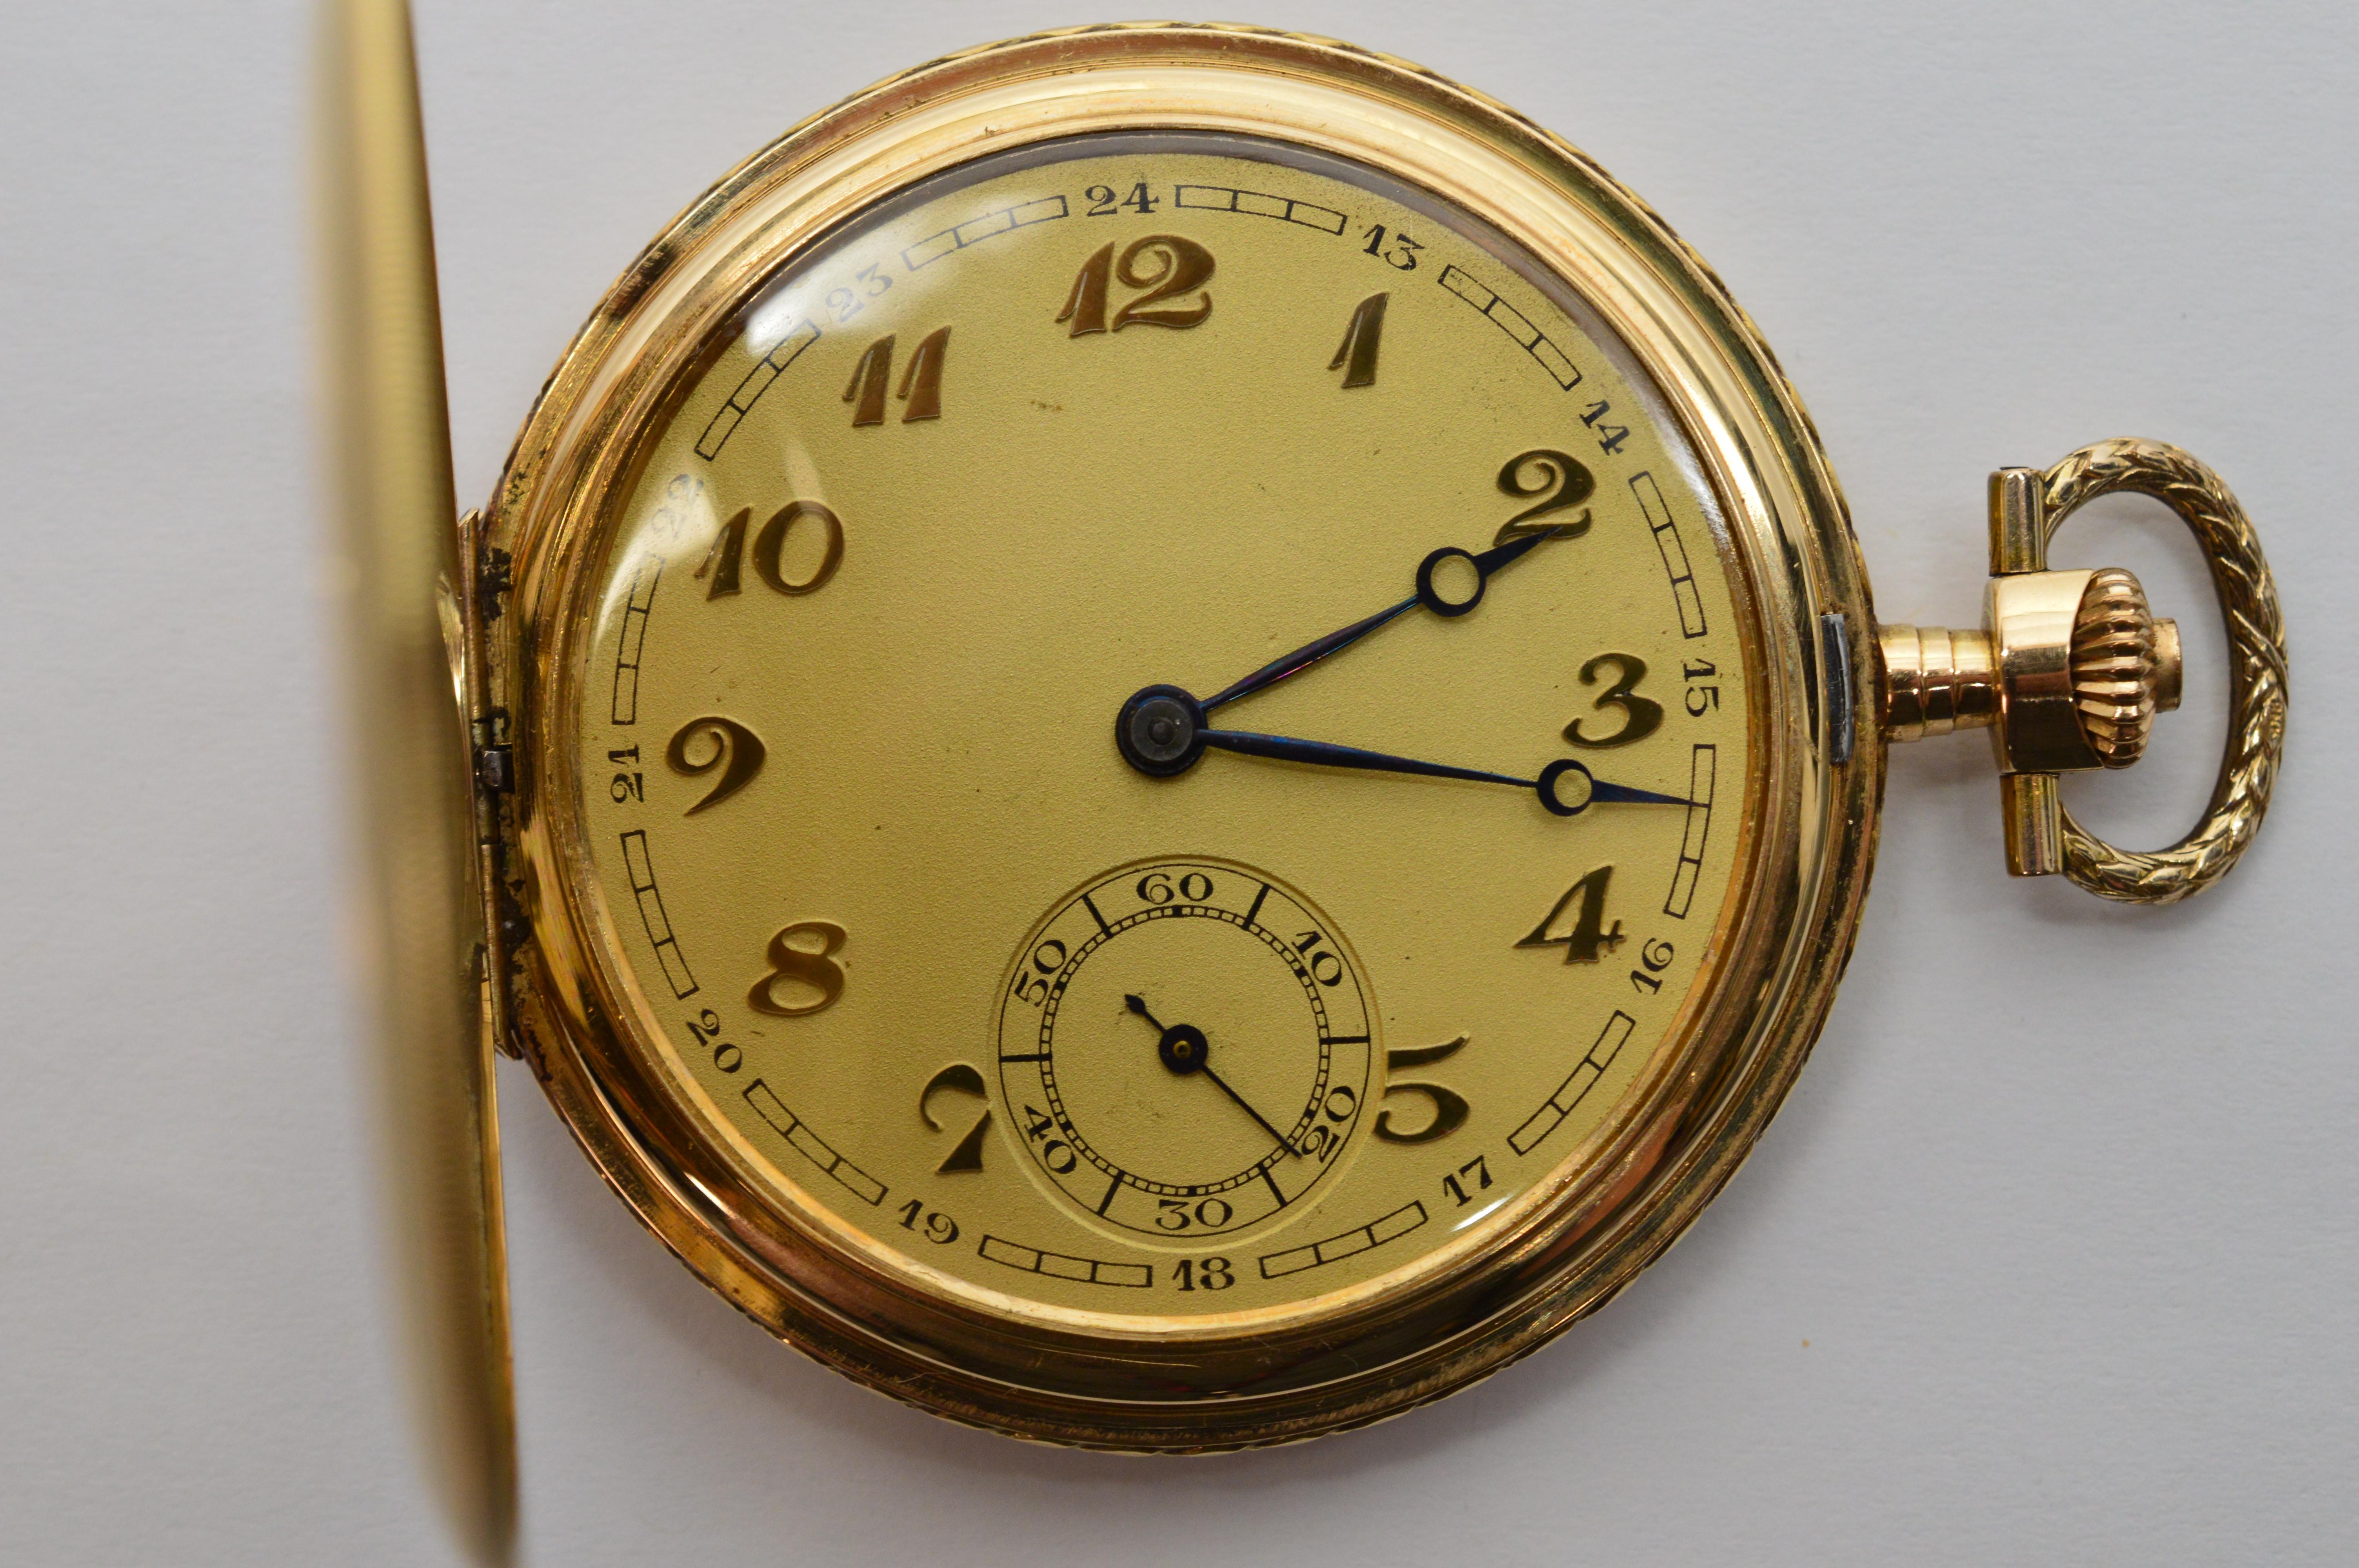 Early 20th century, this Swiss made manual 51mm Vogt Pocket Watch was made as an export to Germany in fourteen karat 14K yellow gold. Assembled with an engine turned hunting case #114679 in 14 karat yellow gold with interior dust cover in white